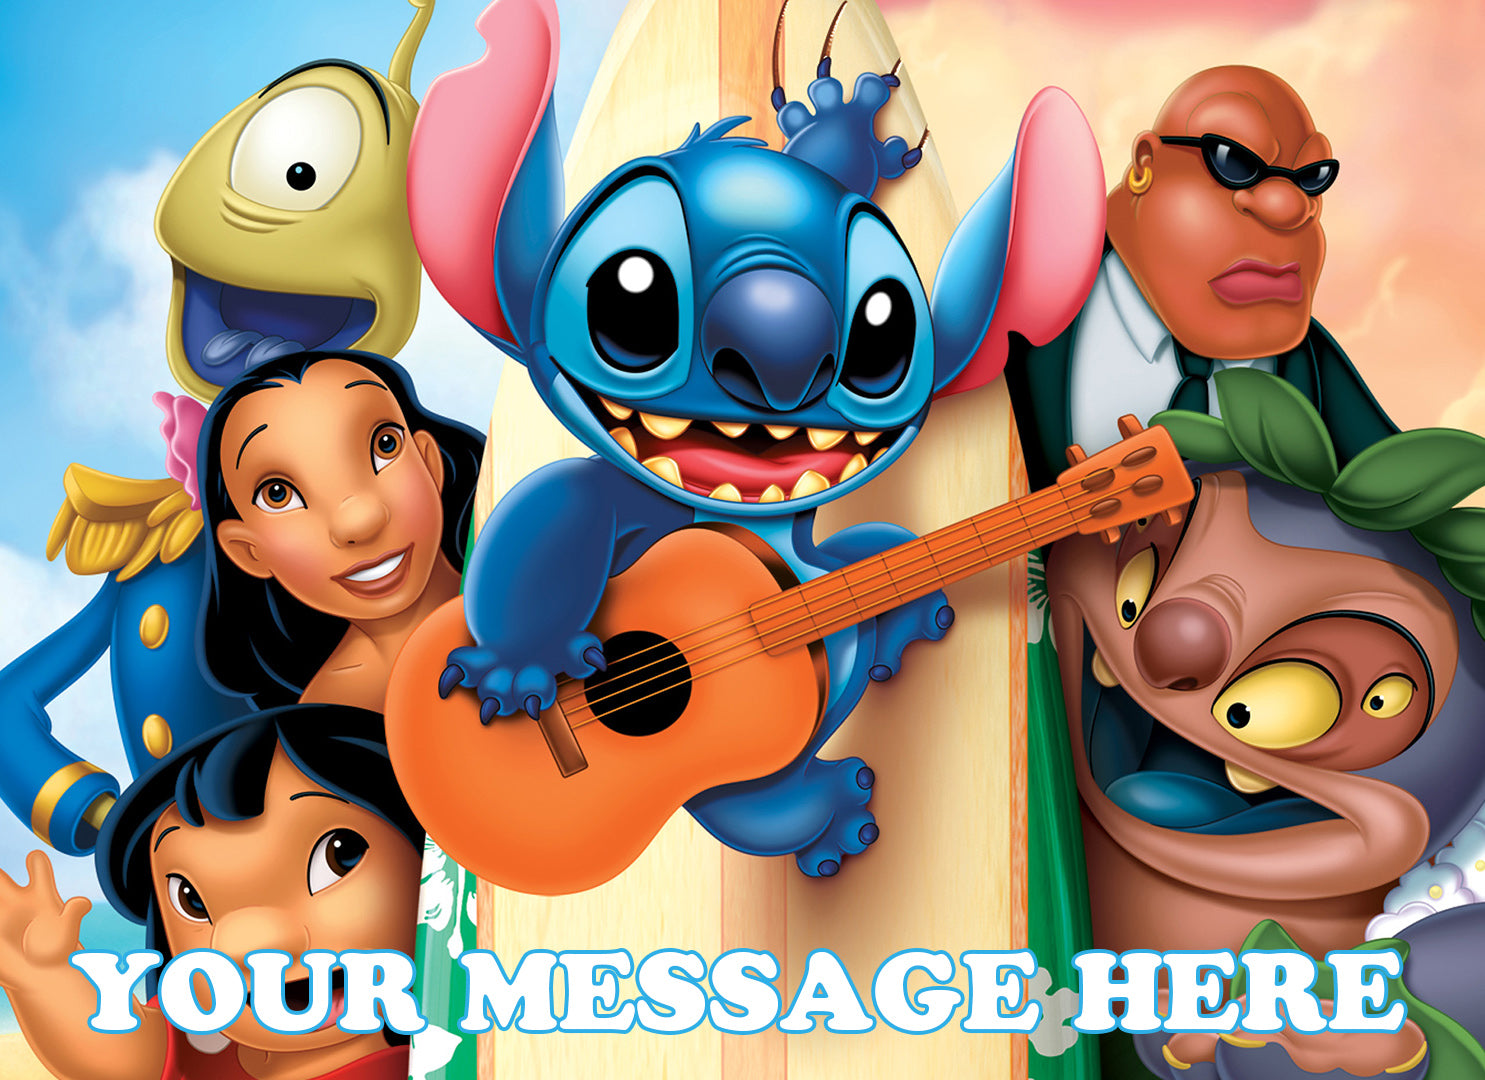 Lilo & Stitch Edible Image Cake Topper Personalized Birthday Sheet Dec -  PartyCreationz